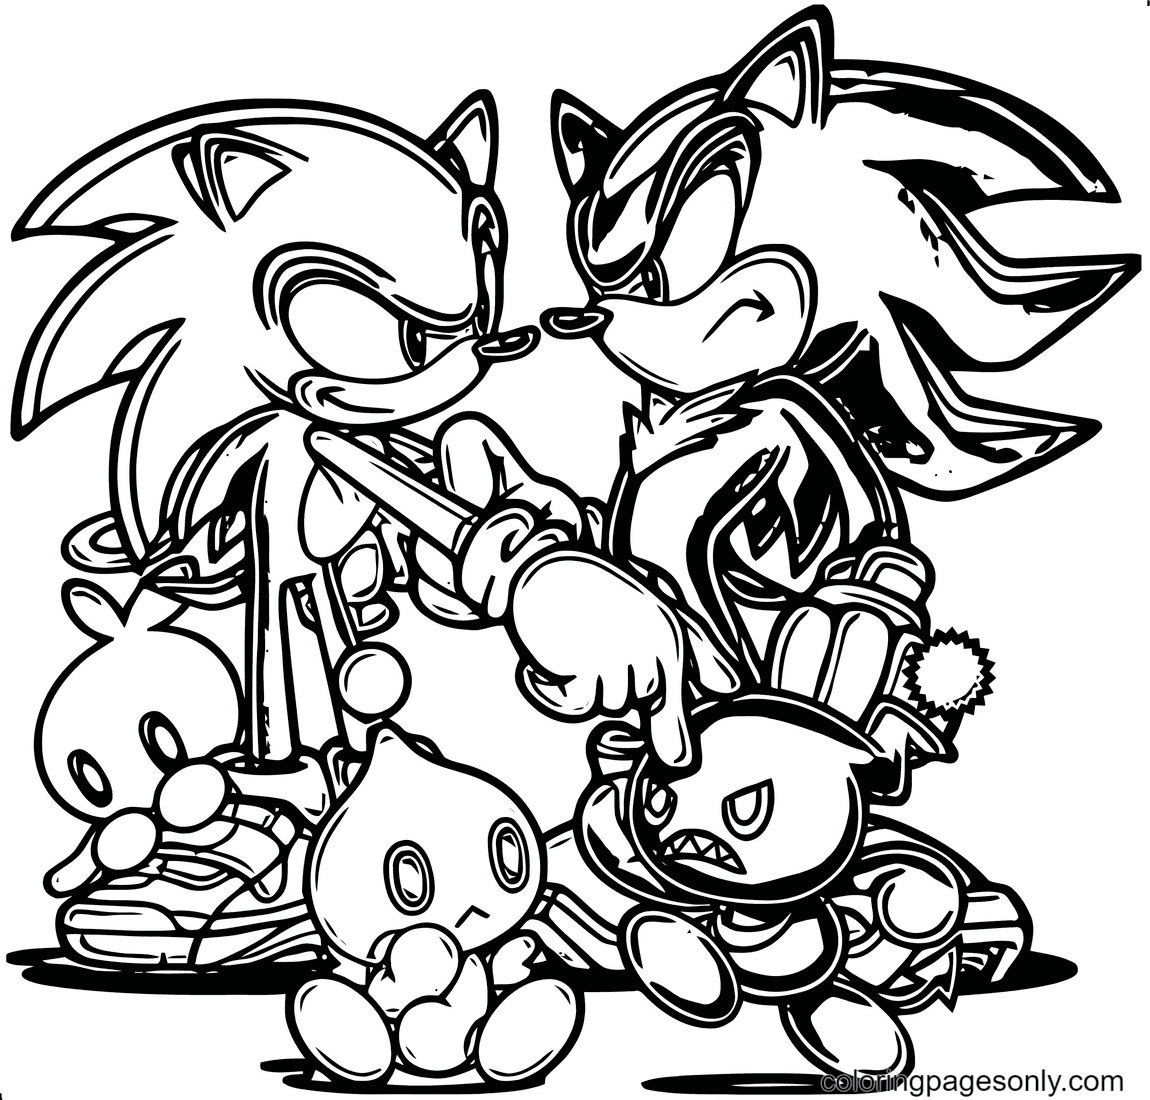 super sonic coloring pages